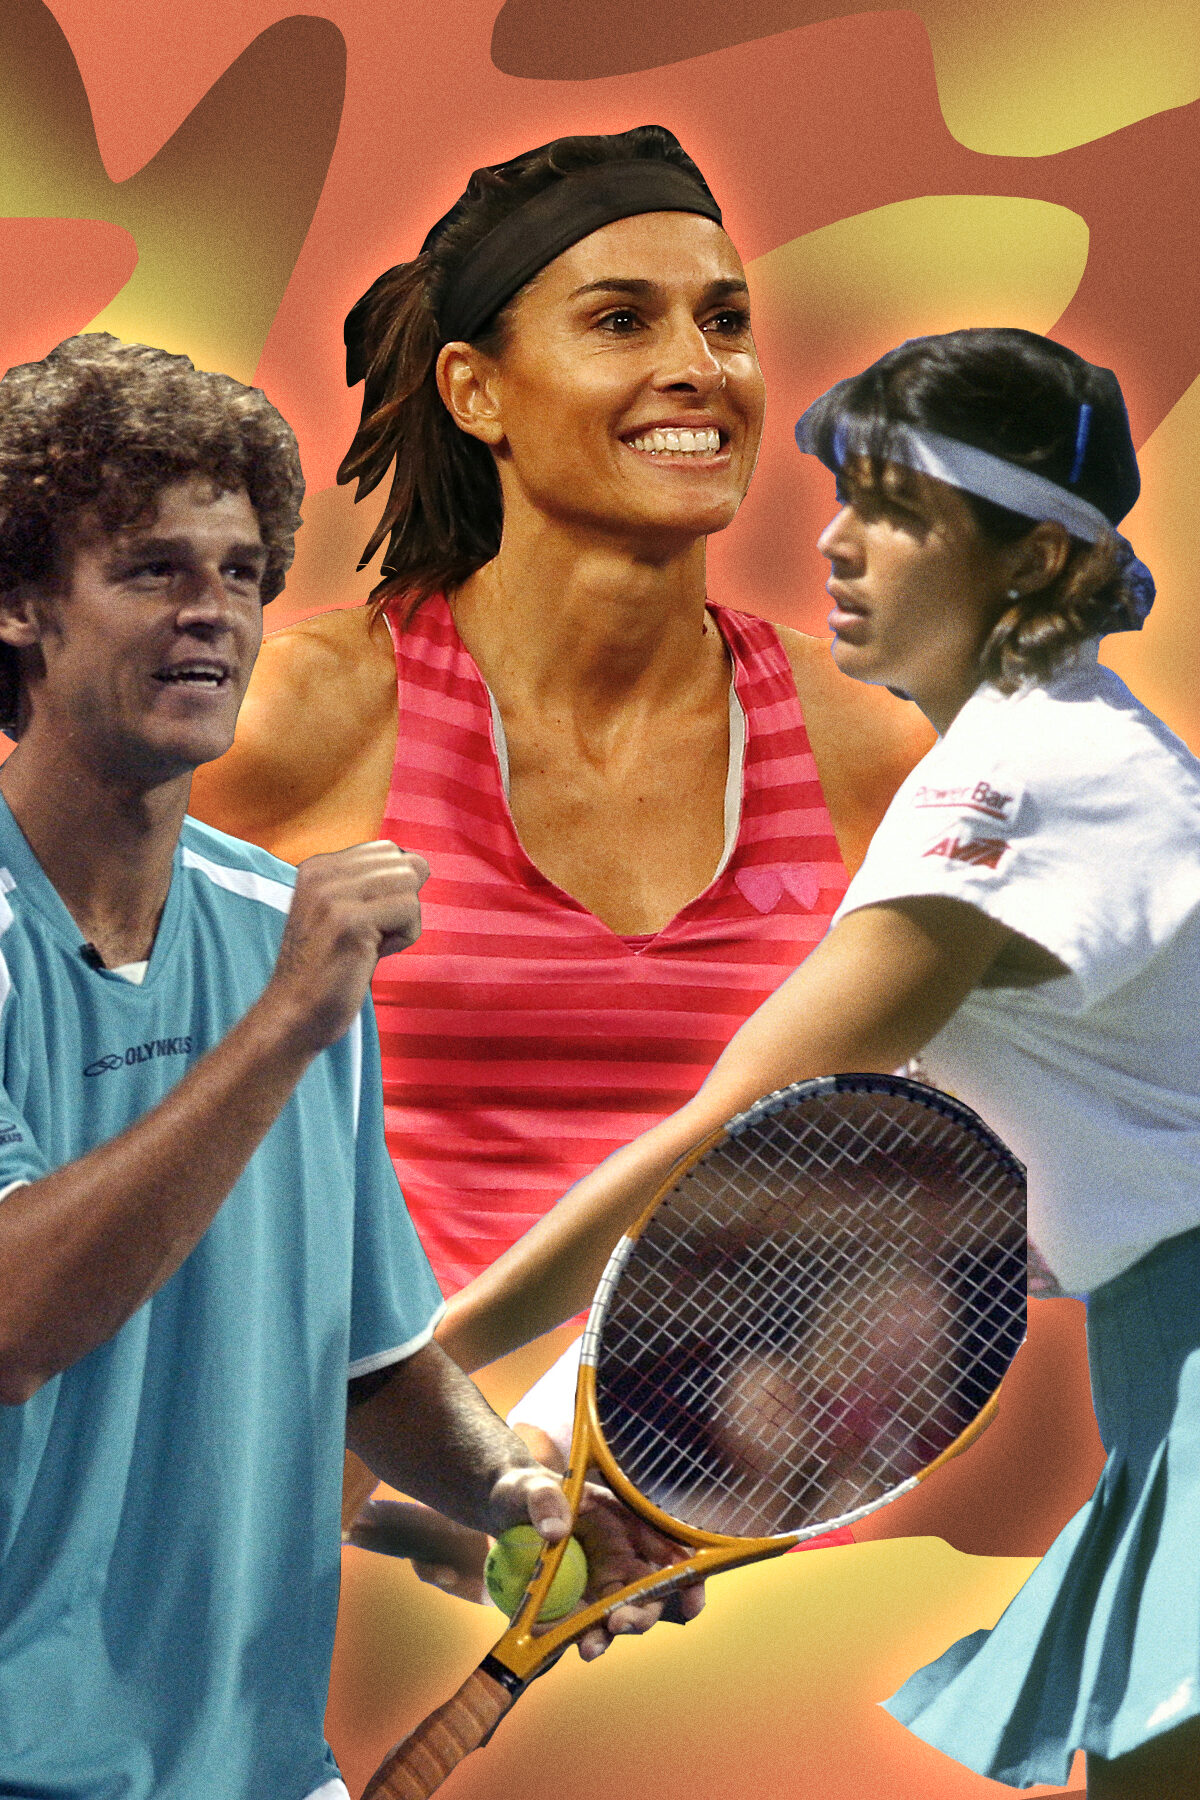 Collage for Latin America tennis players you should know